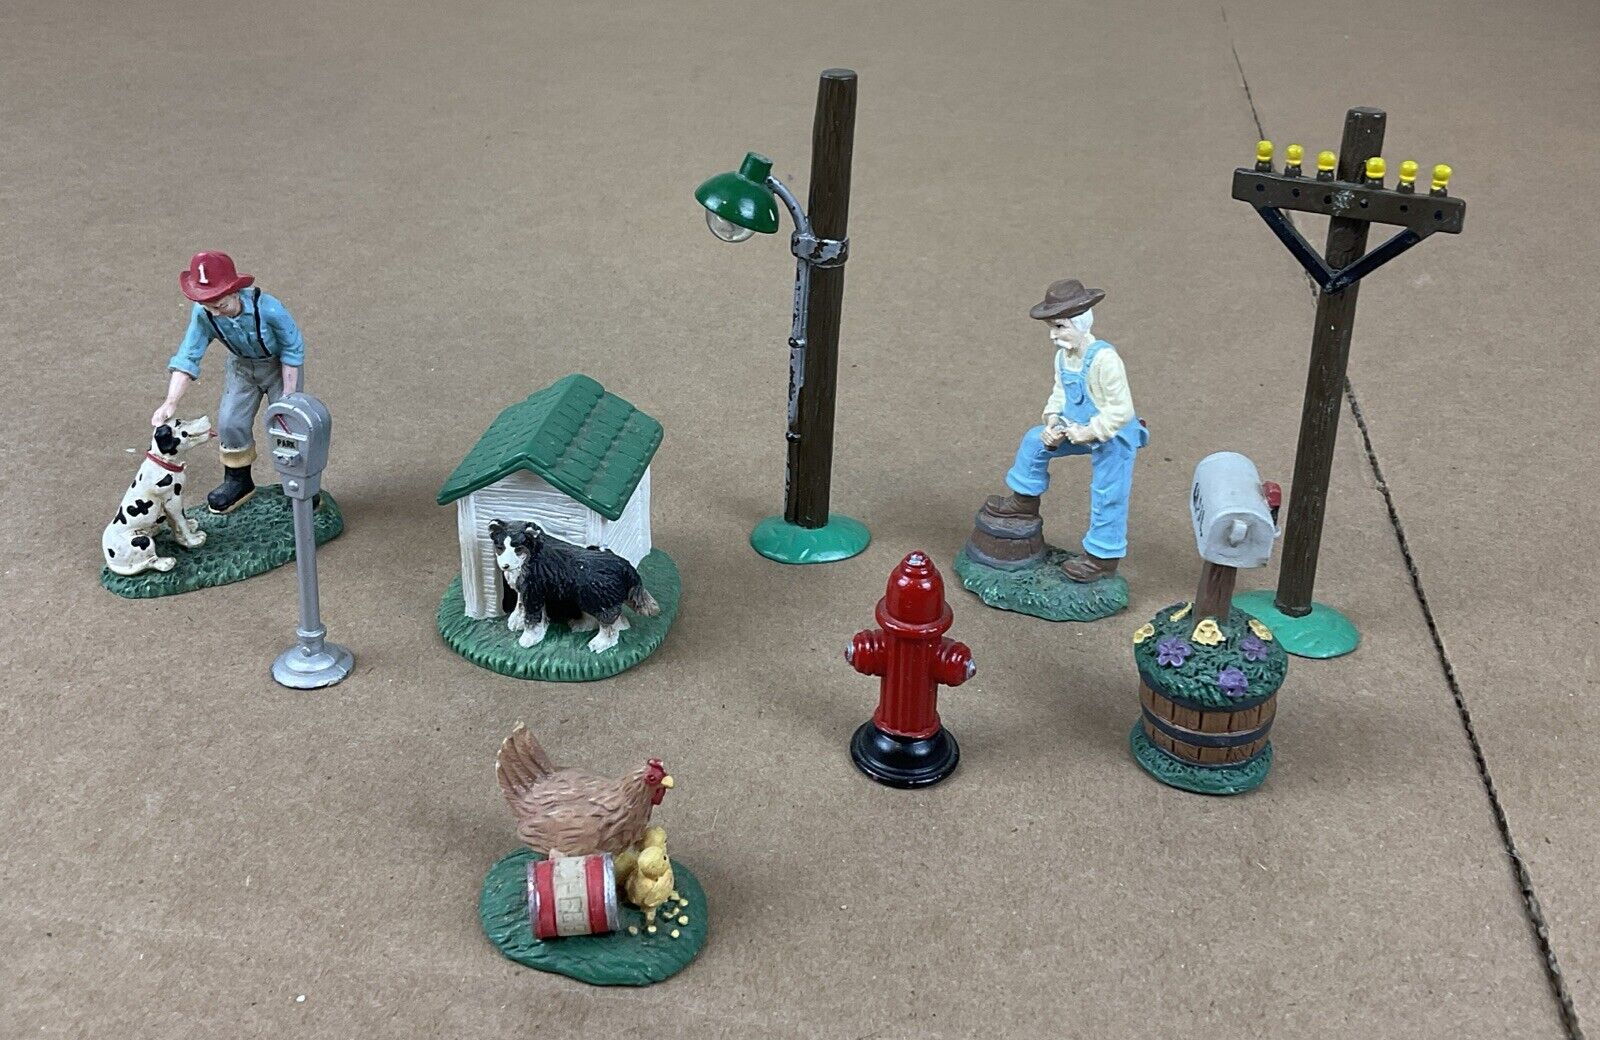 Cannon Valley Figures Doghouse Chicken Meter Utility Pole St Light Dalmatian Etc